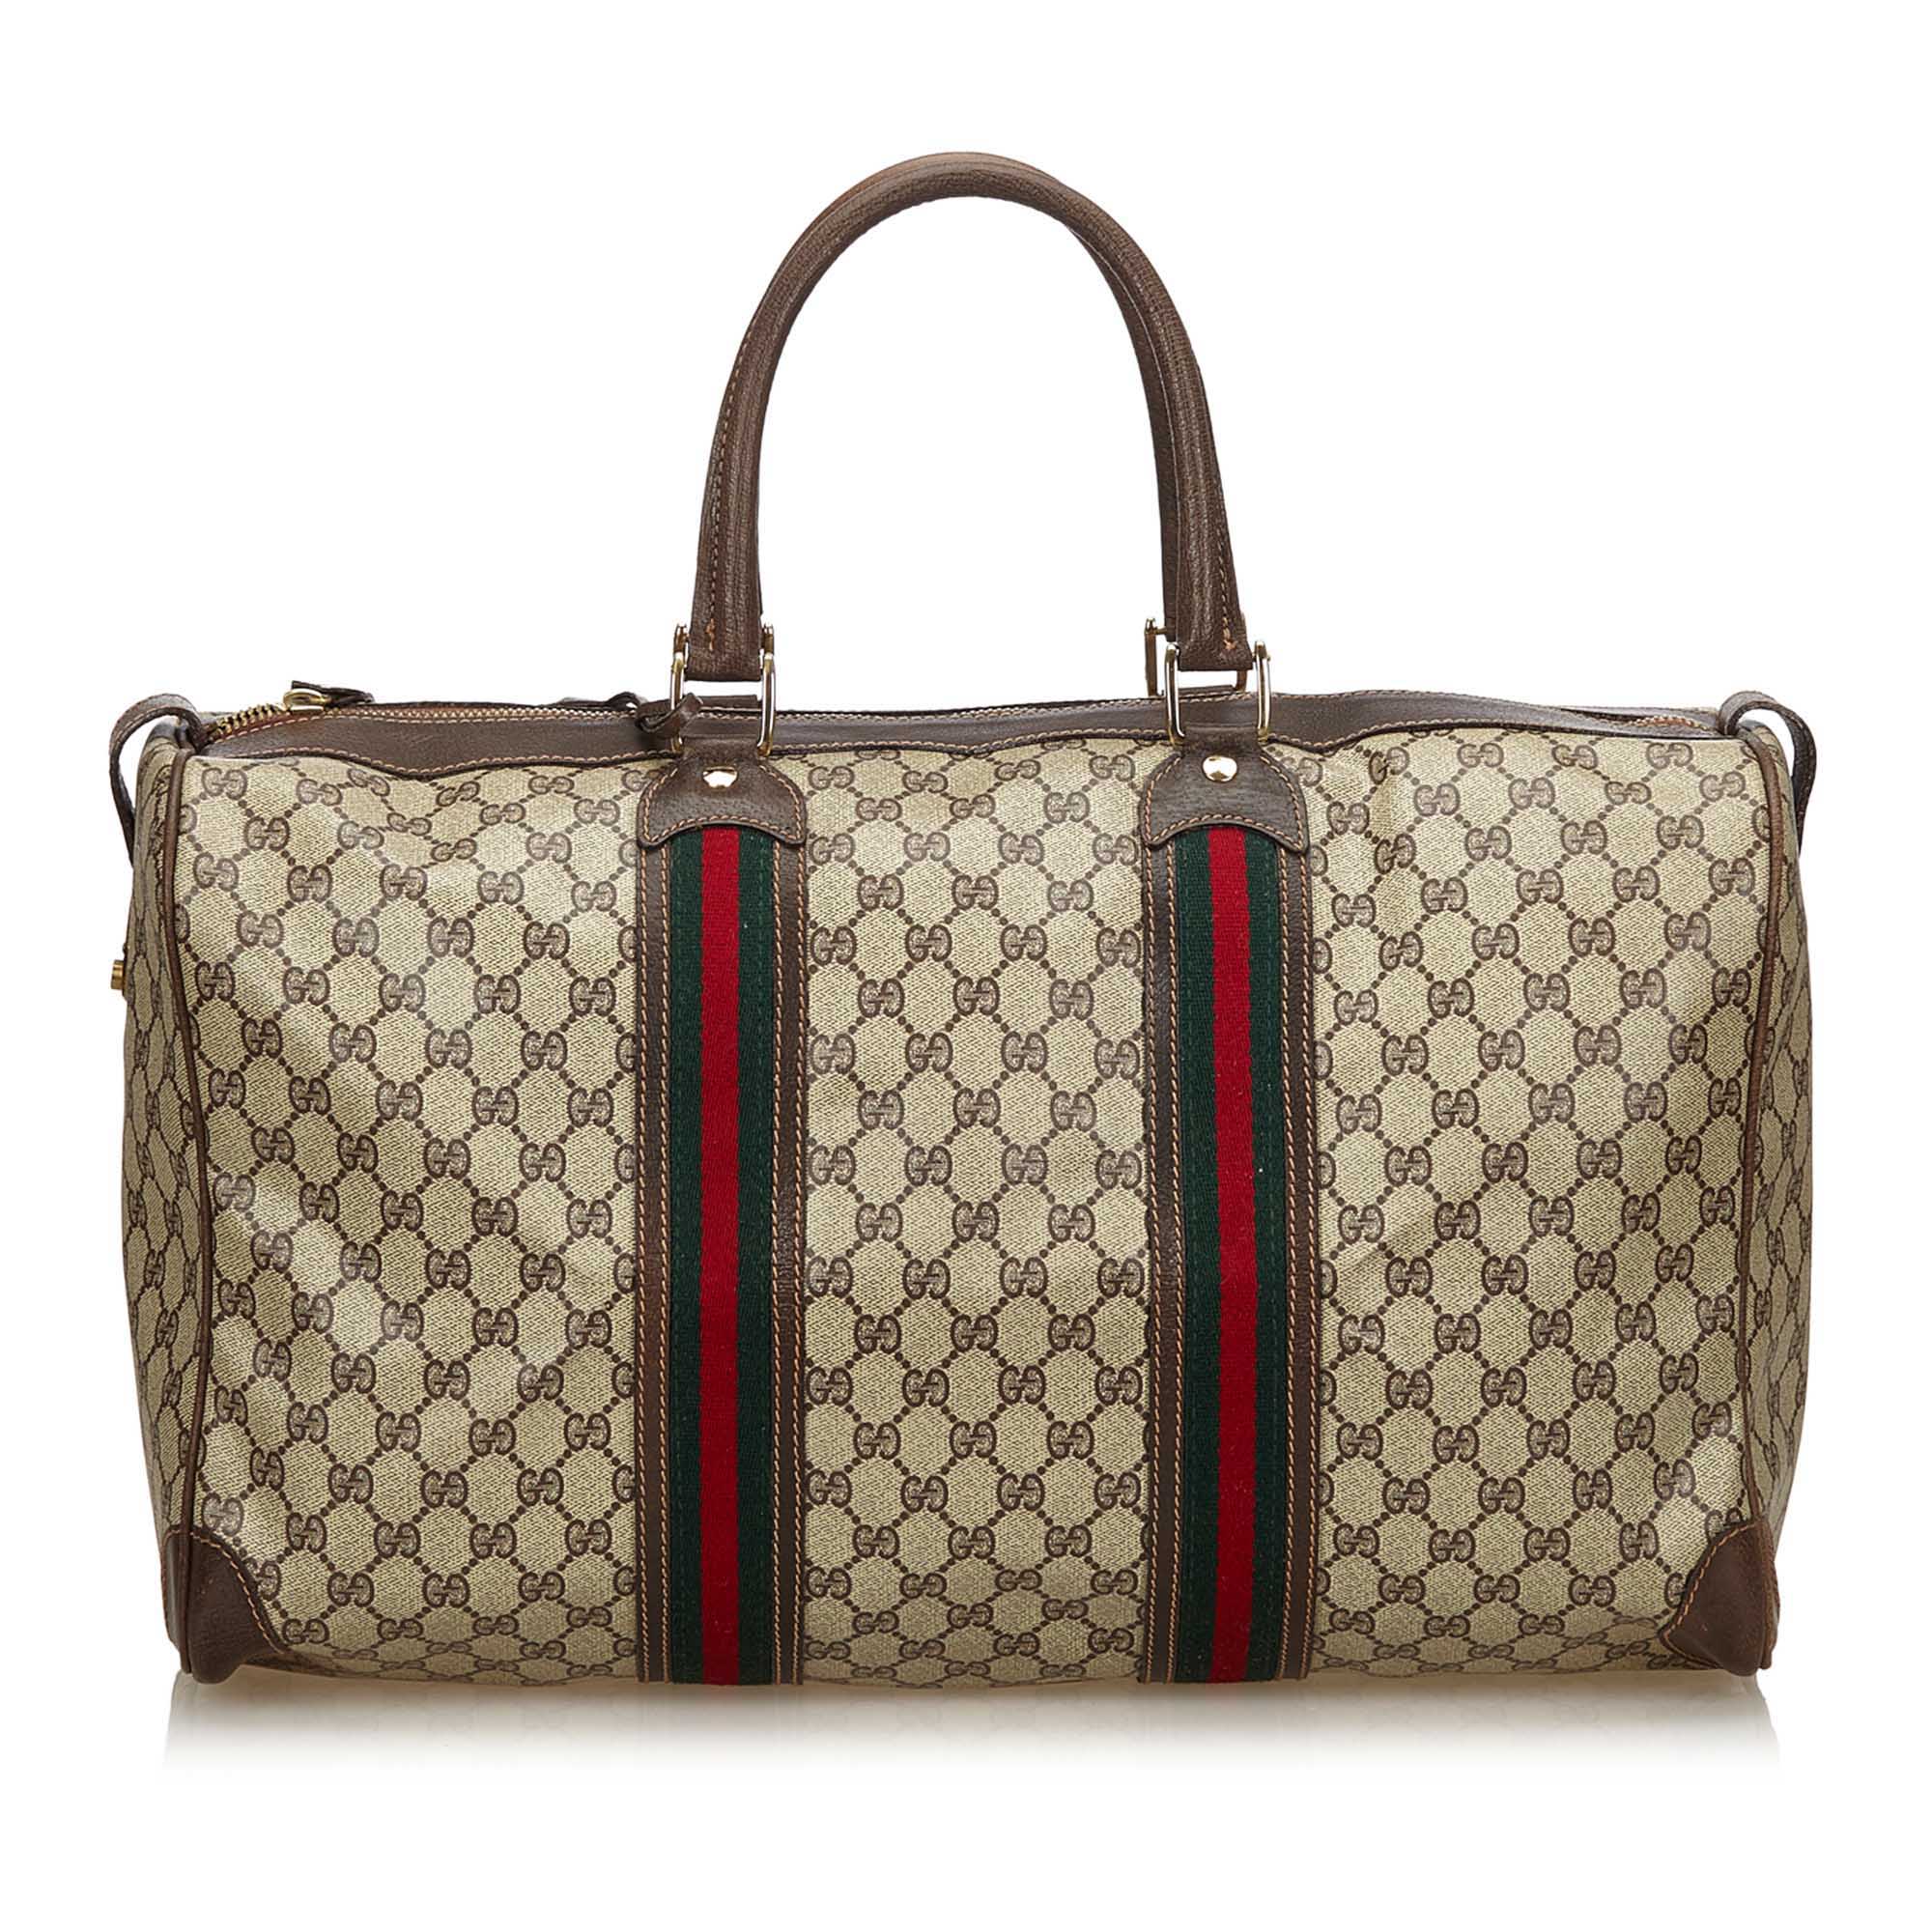 GUCCI GG WEB PLUS / SUPREME WEEKENDER CARRY ON BAG on Leef Luxury authentic designer resale ...